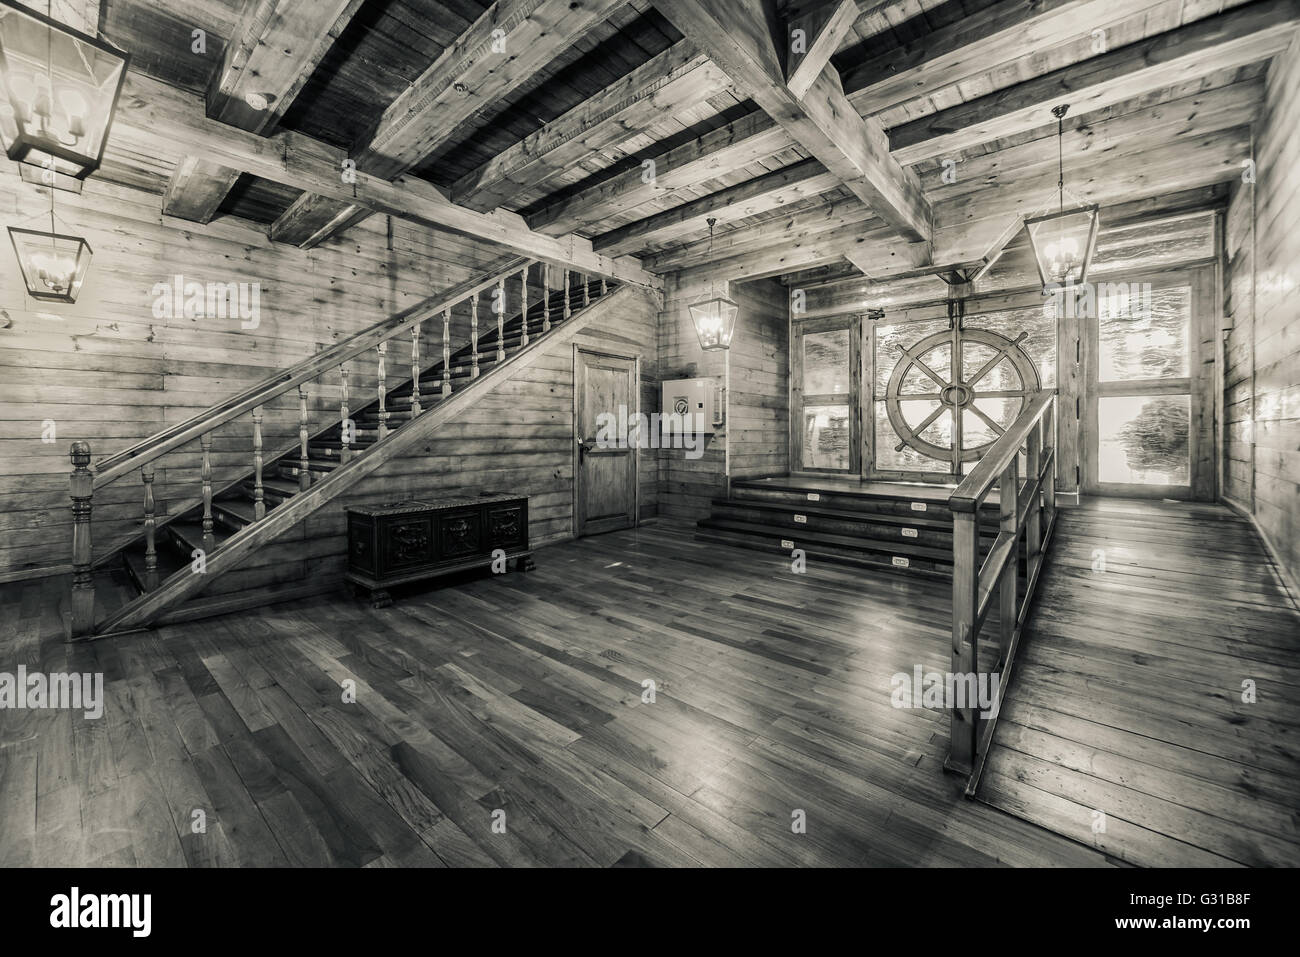 Interior of old pirate ship. Black and white image Stock Photo